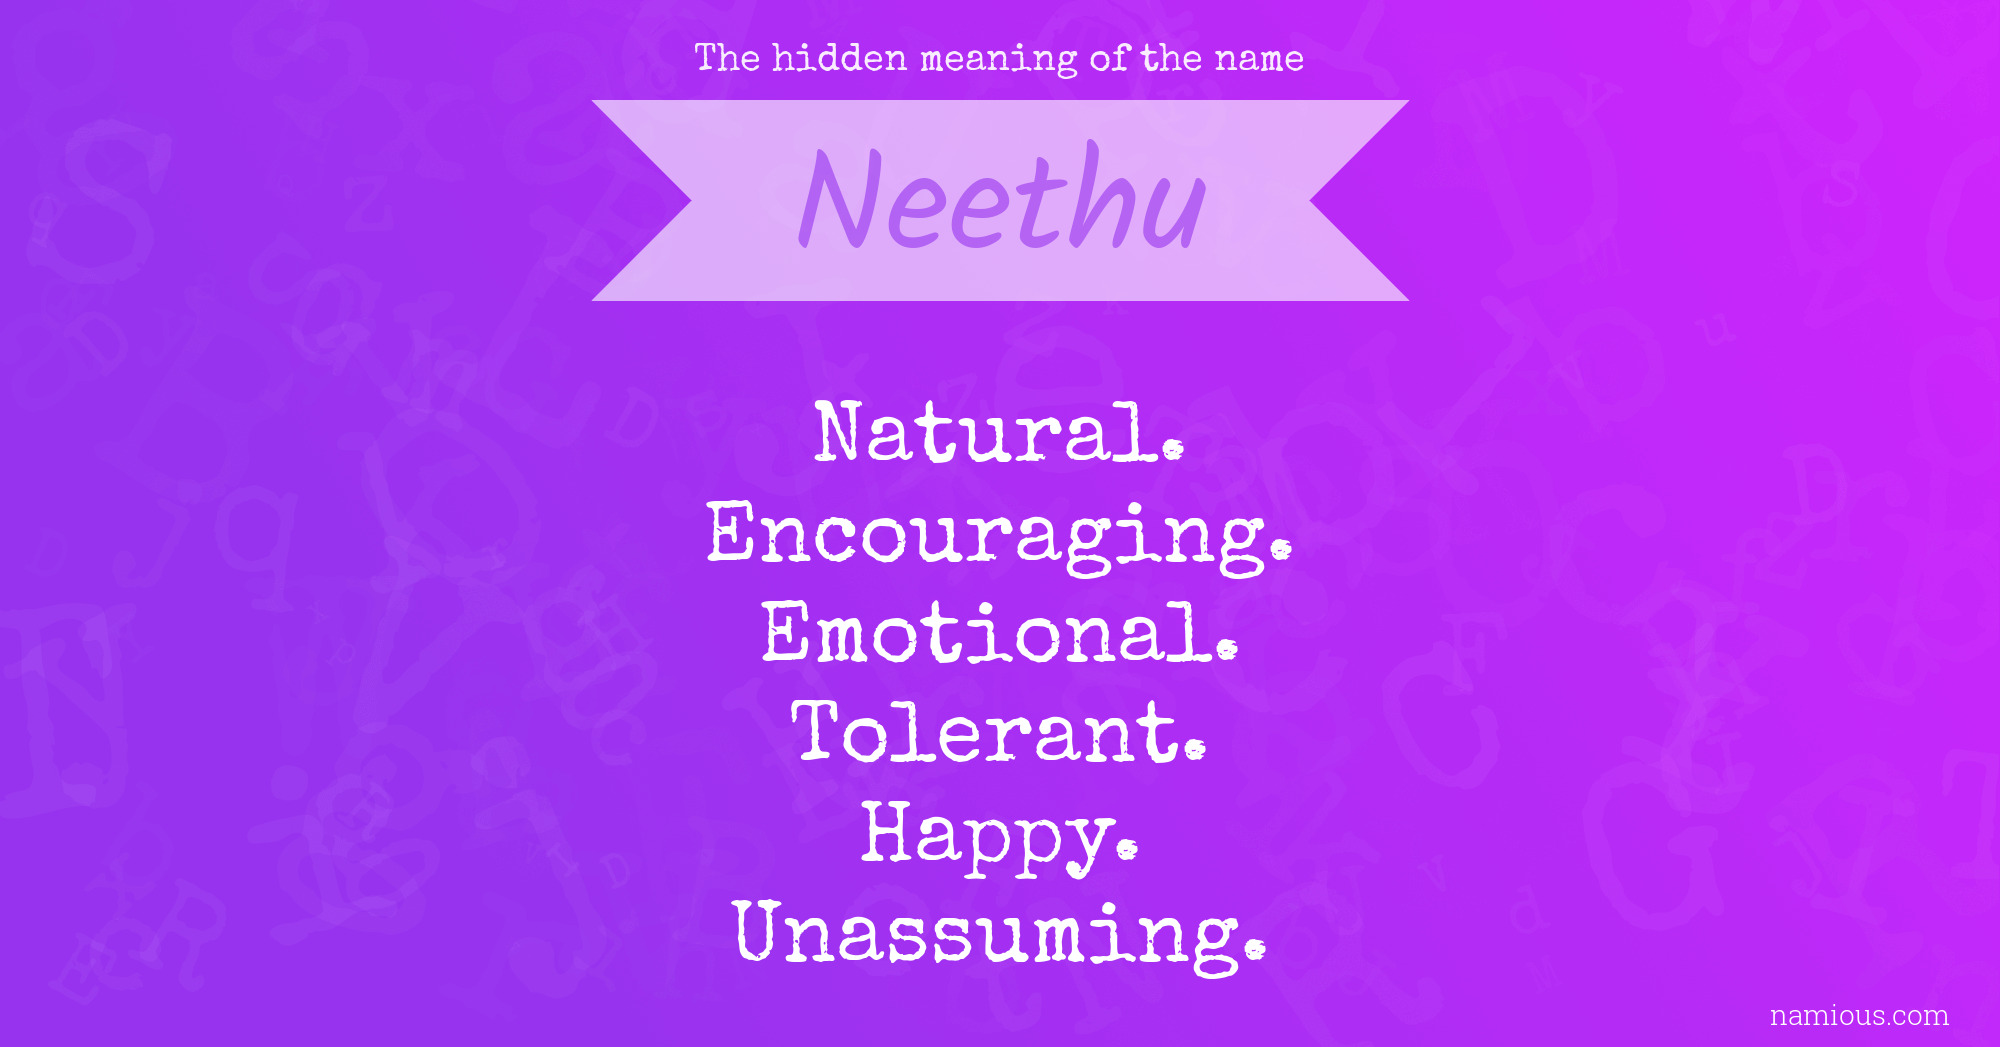 The hidden meaning of the name Neethu